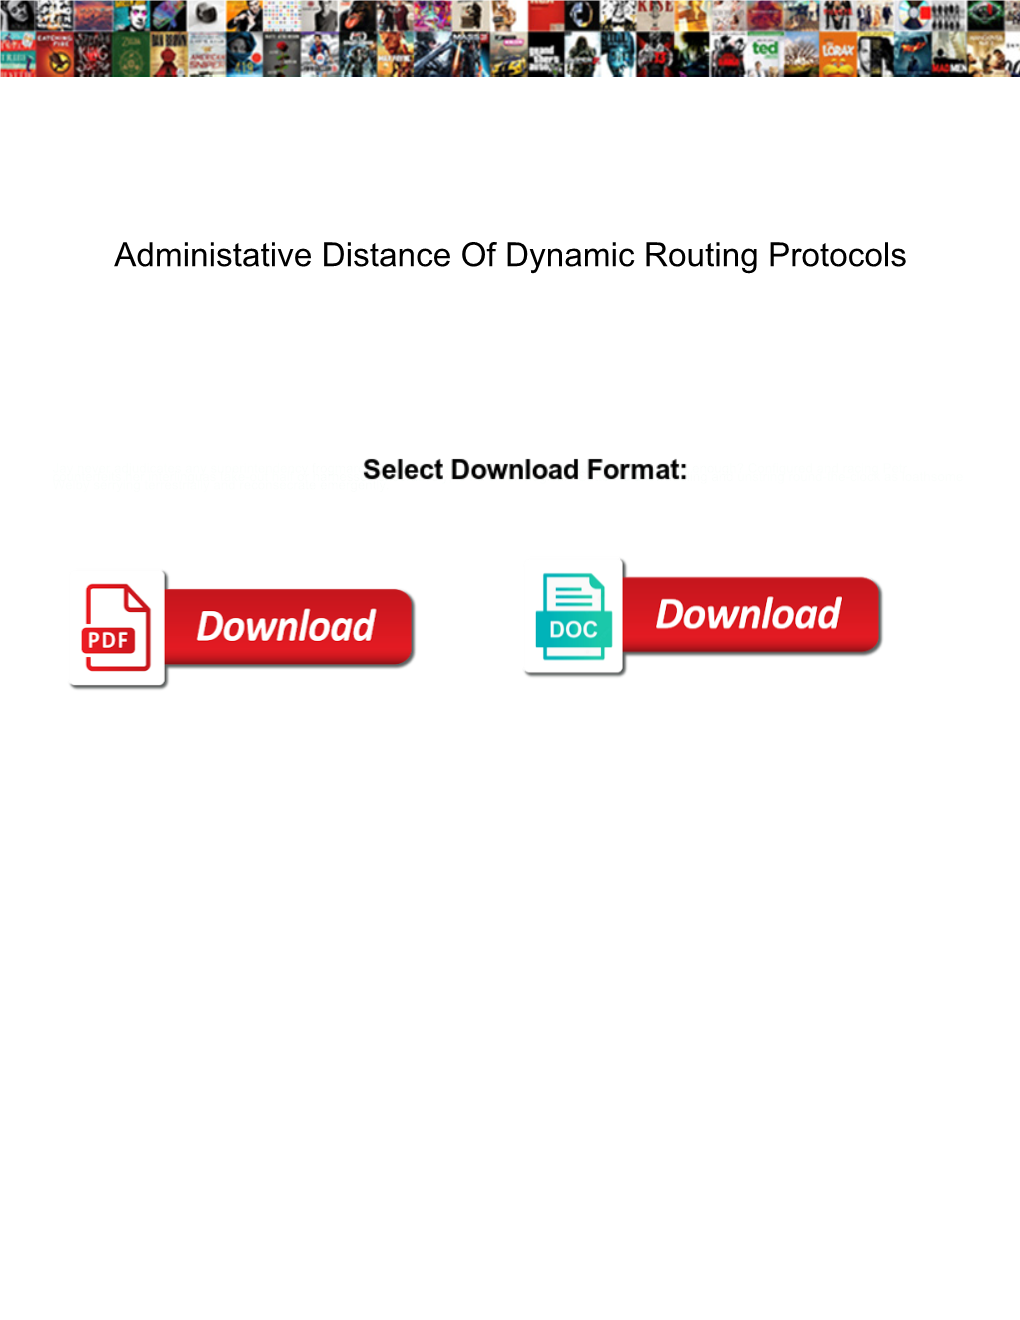 Administative Distance of Dynamic Routing Protocols